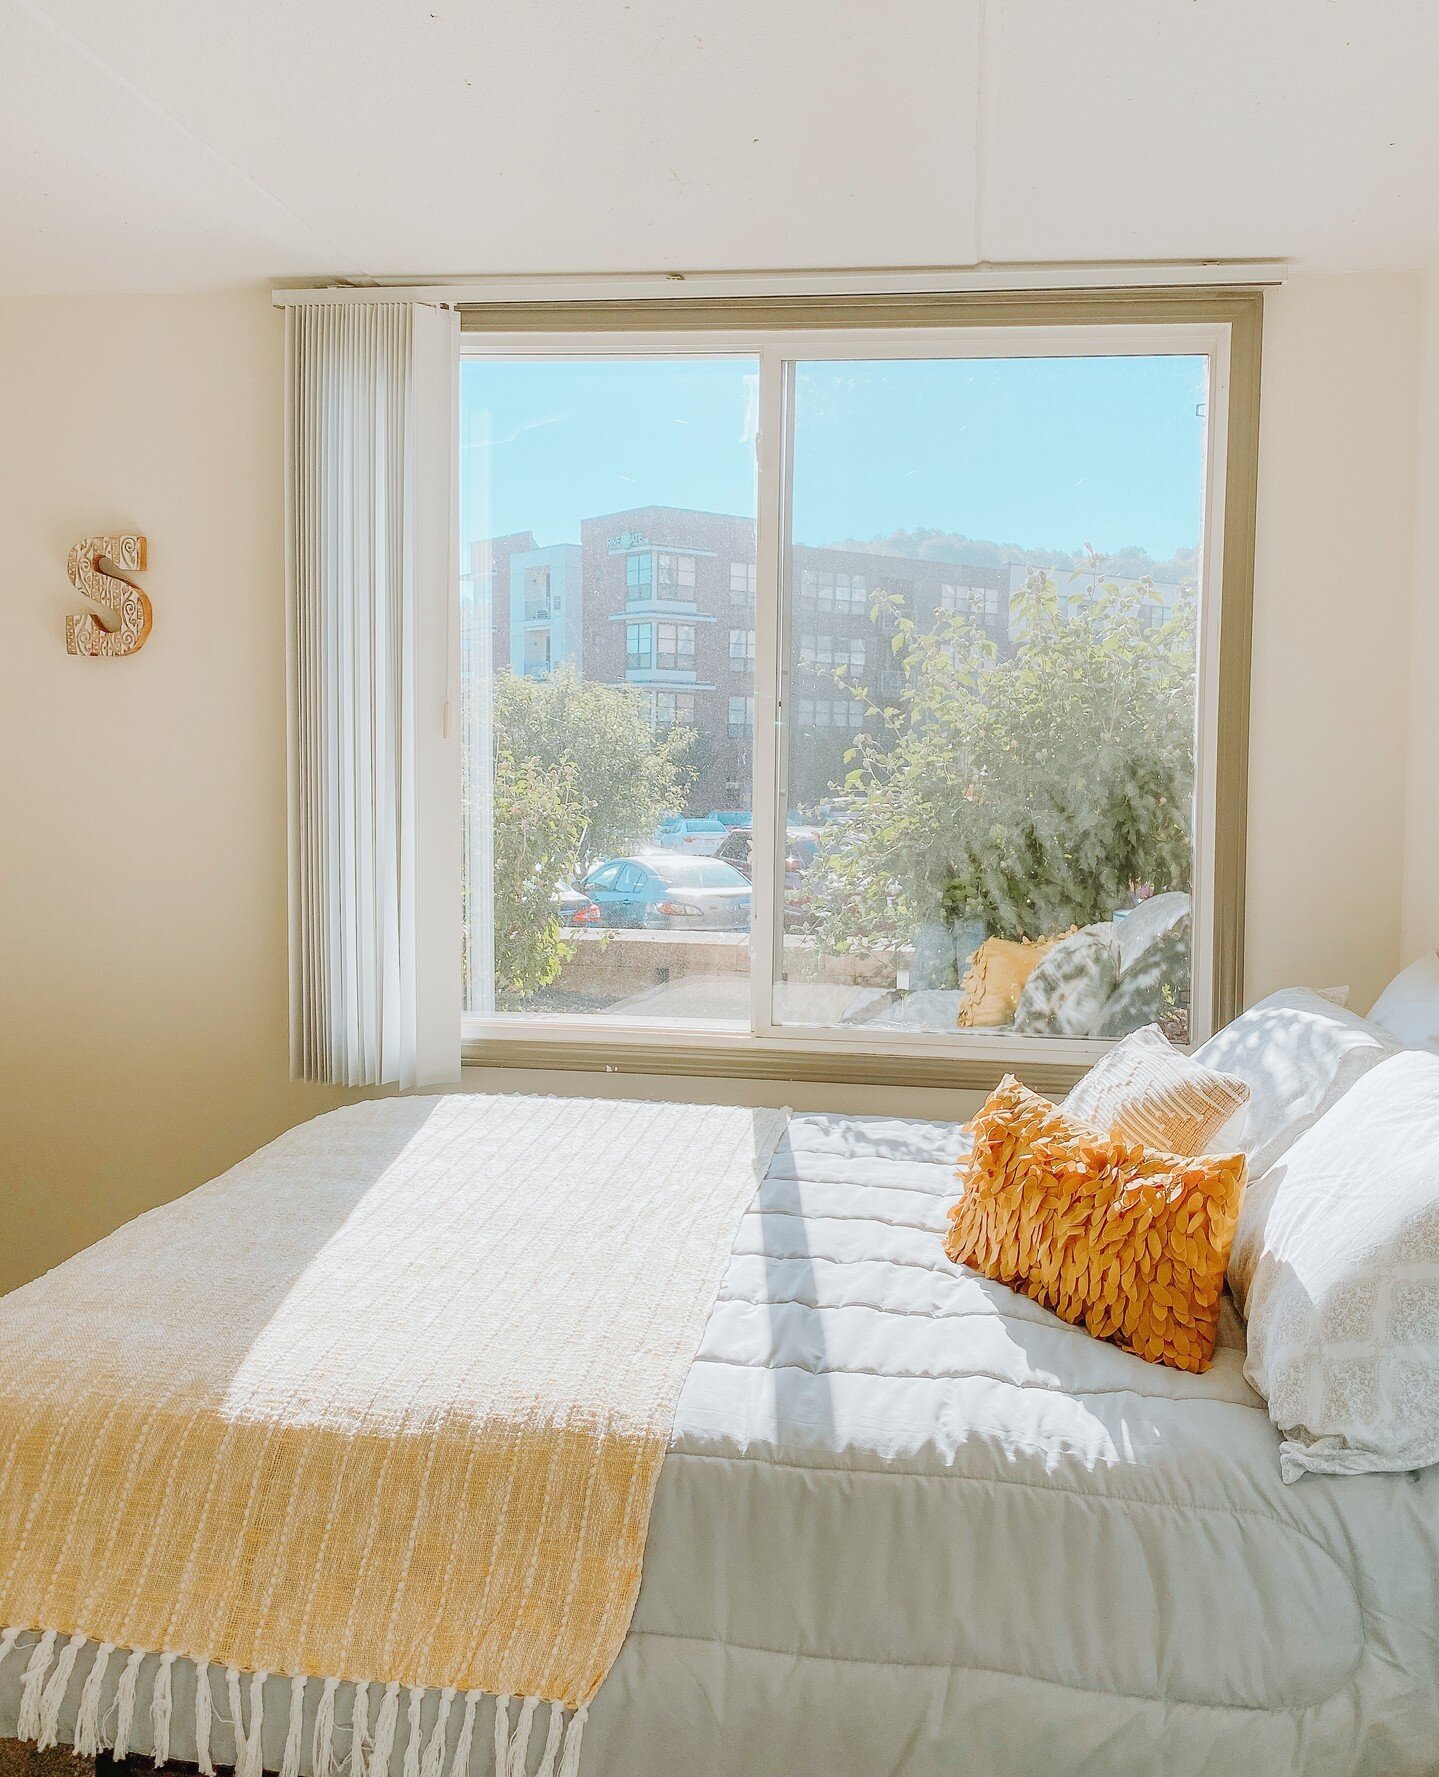 ✨Find your perfect abode in one of our stunning apartments for rent. Our cozy studios are the perfect fit for anyone. Come home to the comfort and security you deserve.✨ #apartmentsforrent #homeiswheretheheartis #livesouthgreen #riverpark